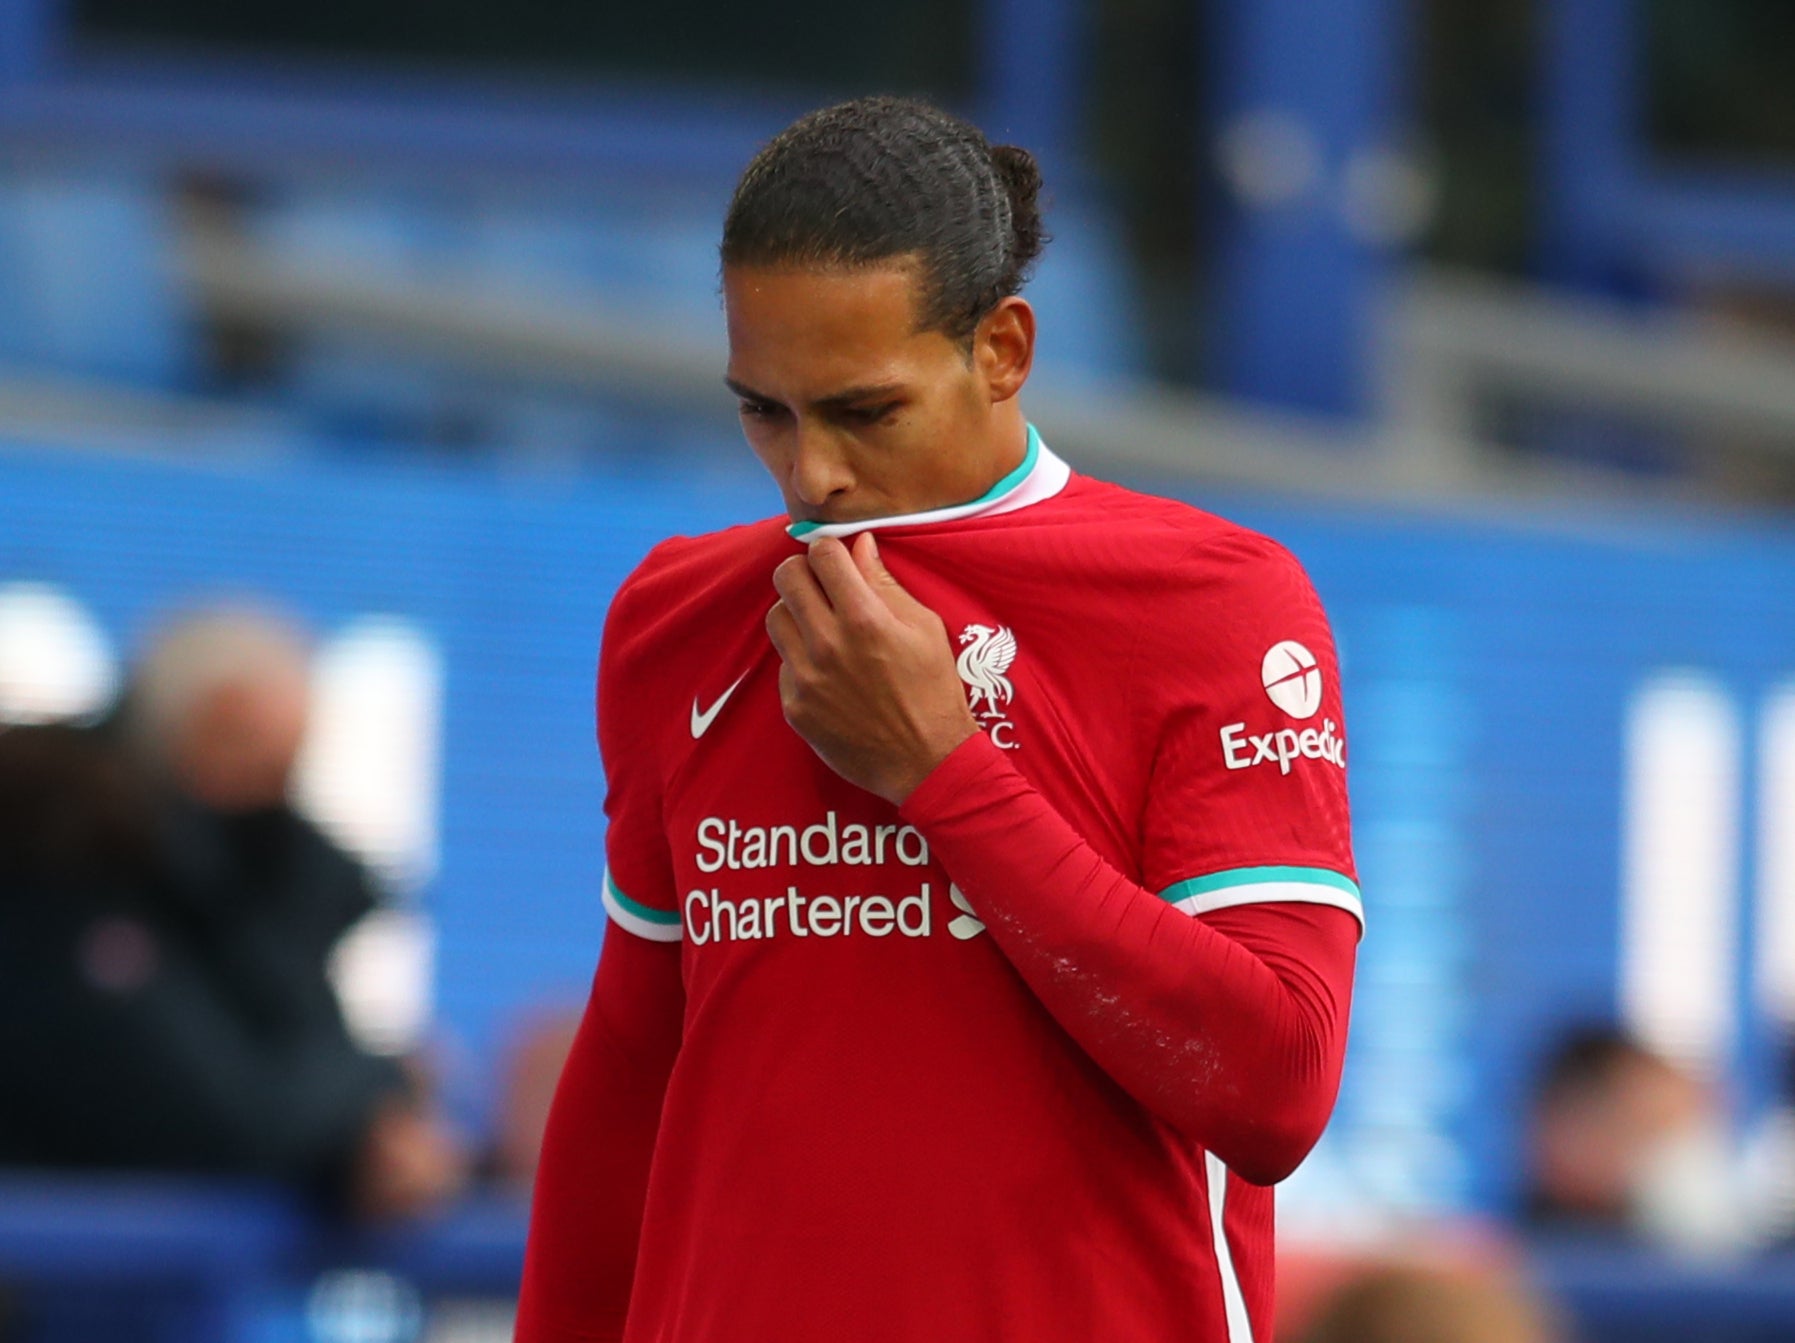 Van Dijk is expected to miss the rest of the season